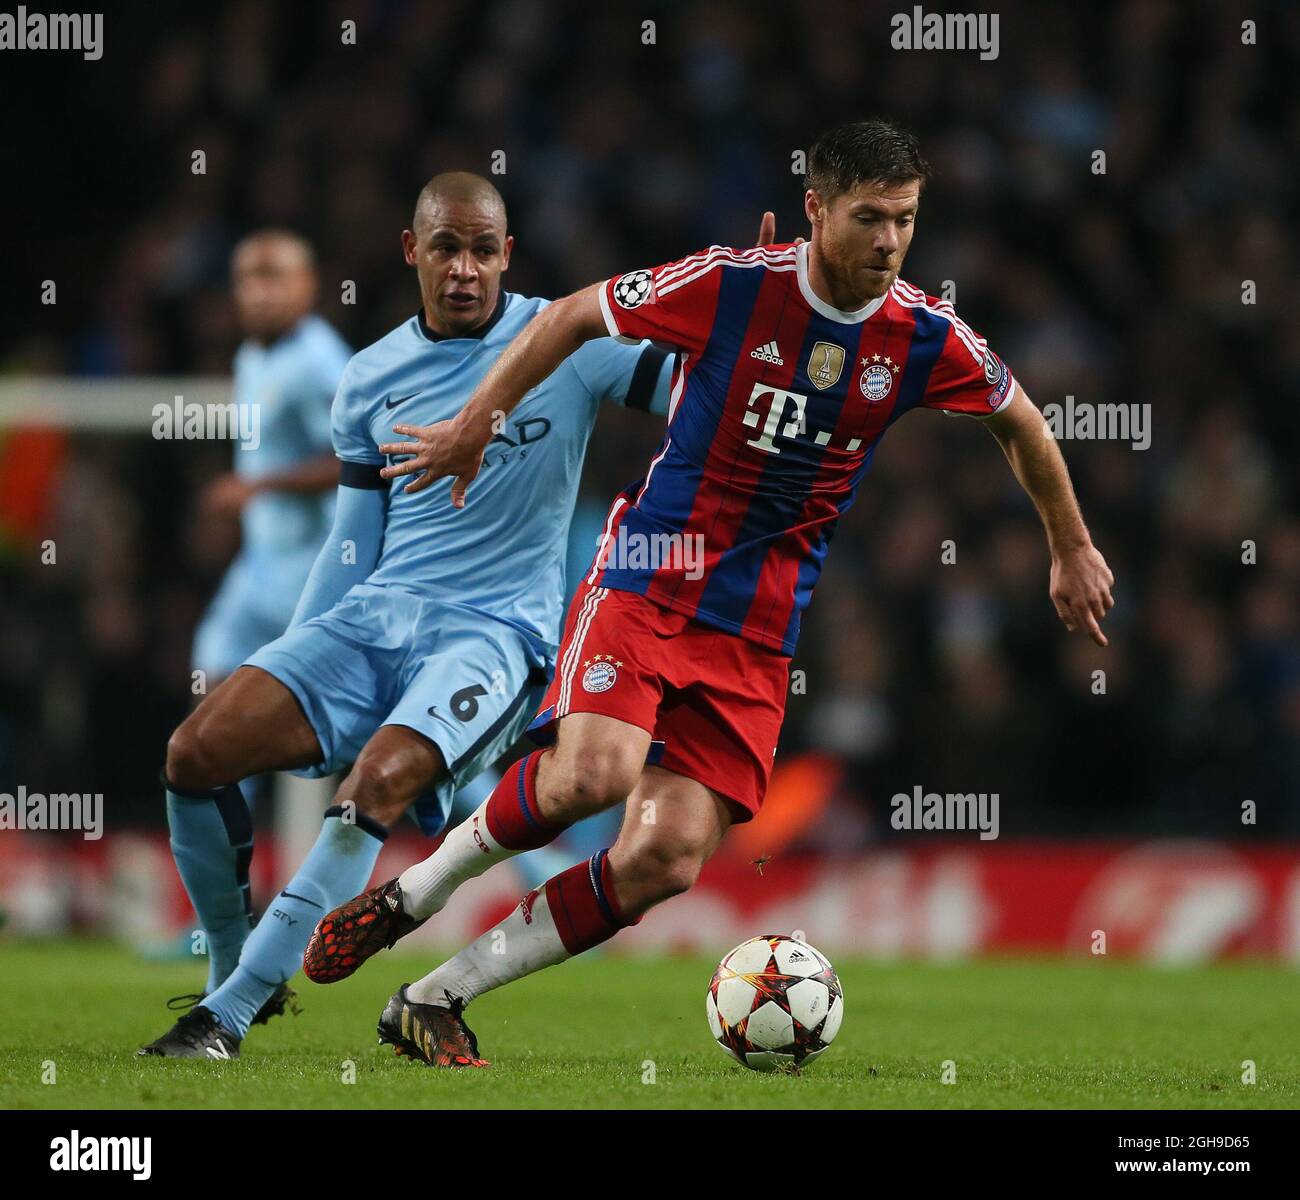 Fernando of Manchester City and Xabi Alonso of Bayern Munich during the Champions League Group E match between Manchester City and Bayern Munich held at Etihad Stadium in England on Nov. 25, 2014. Stock Photo